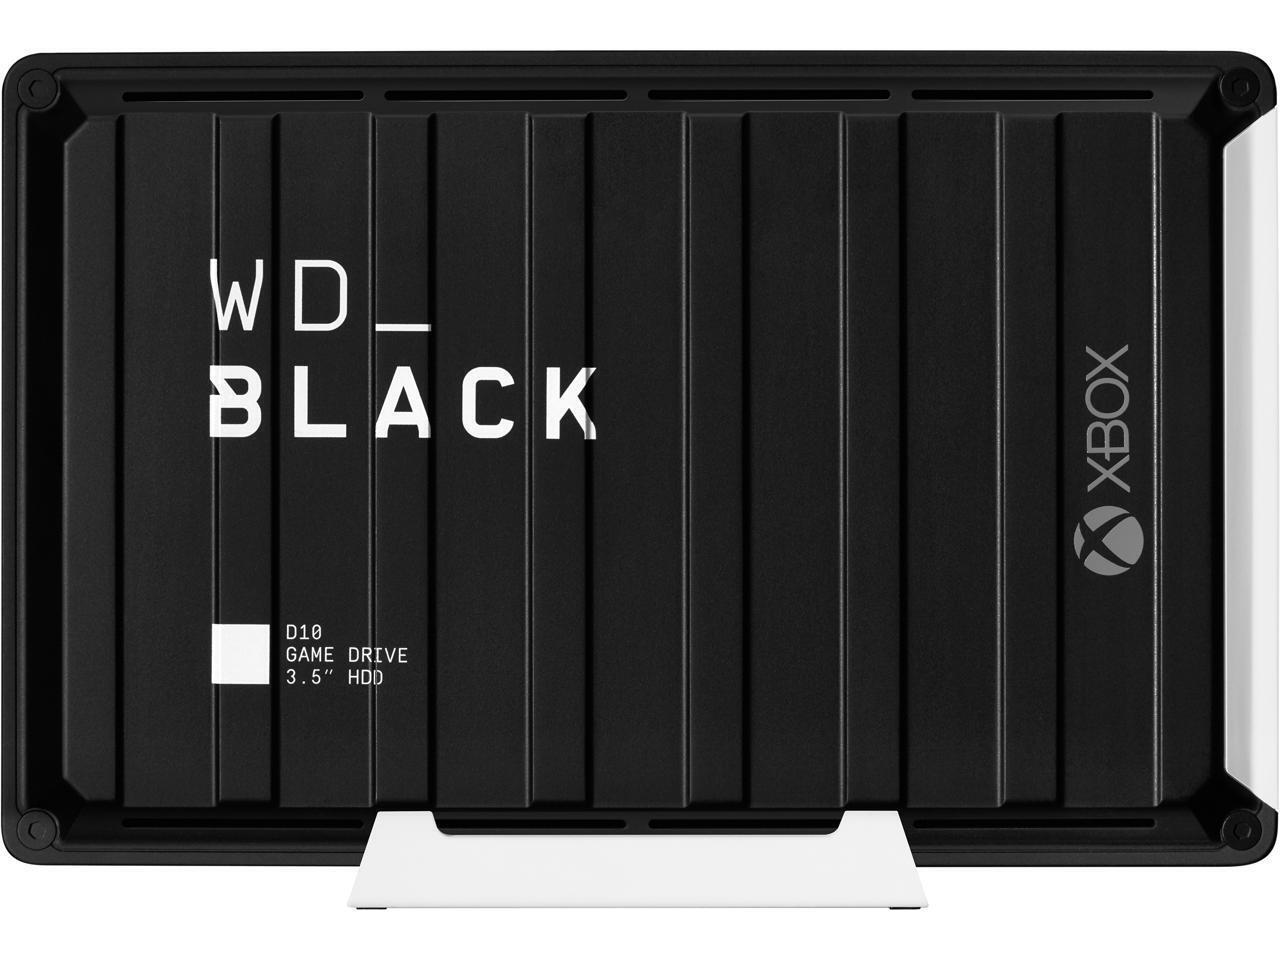 WD Black 12TB D10 Game Drive Portable External Hard Drive for Xbox HDD USB 3.2